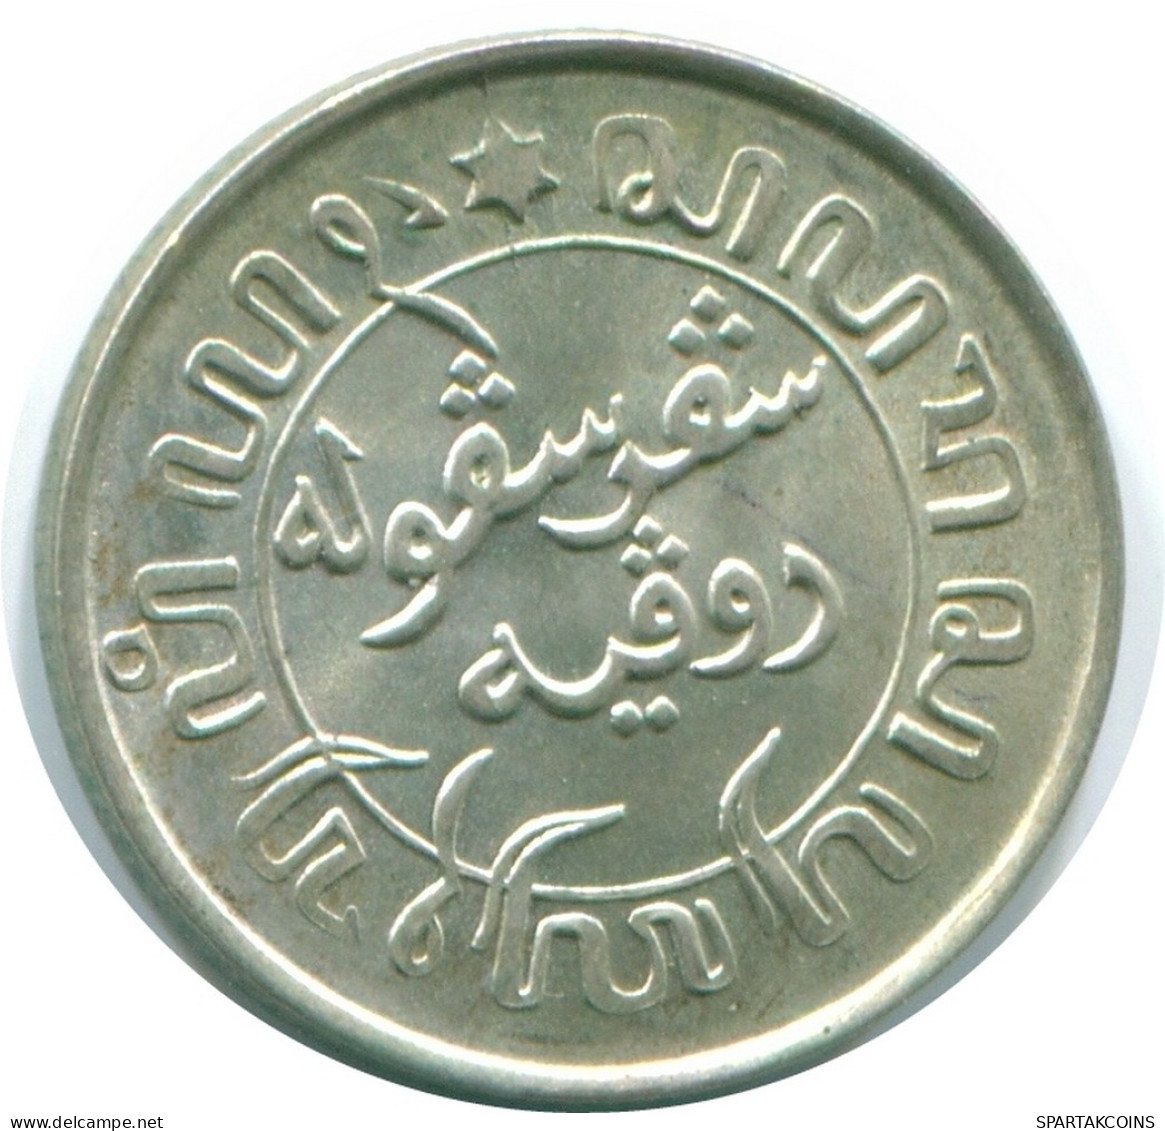 1/10 GULDEN 1941 S NETHERLANDS EAST INDIES SILVER Colonial Coin #NL13803.3.U.A - Indes Neerlandesas